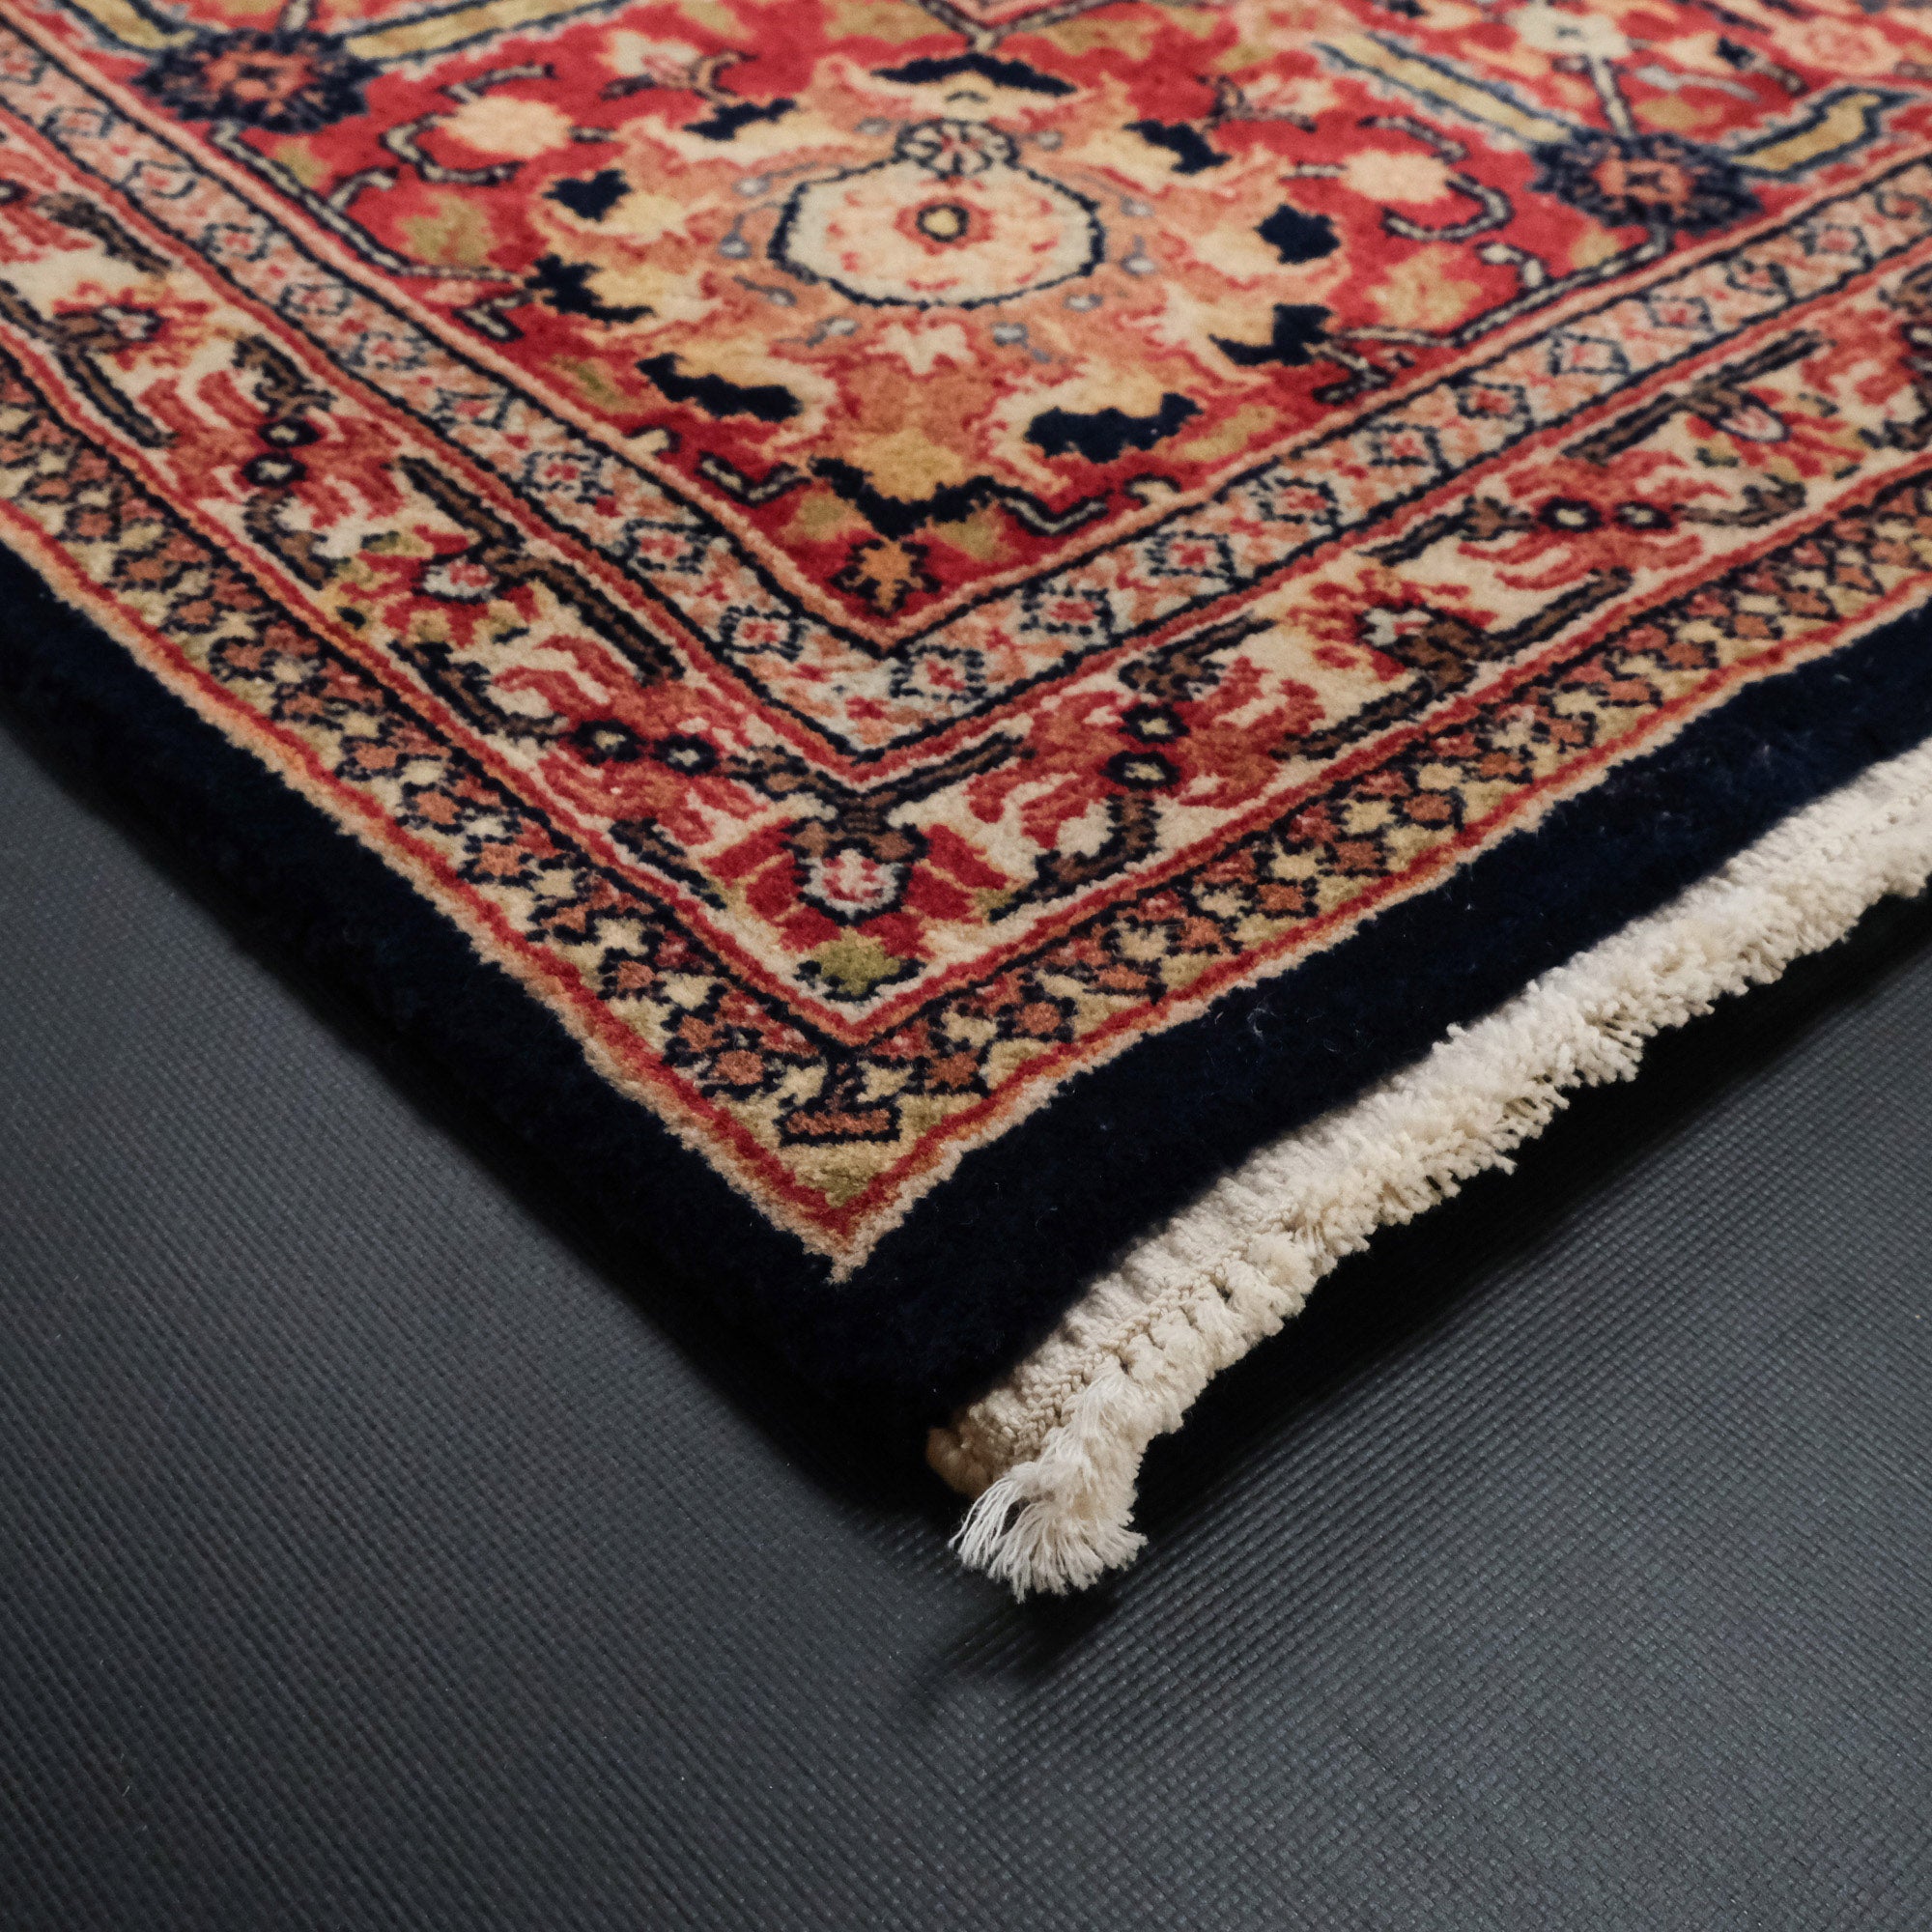 Hand-Woven Floral Patterned Colorful Iranian Bicar Carpet